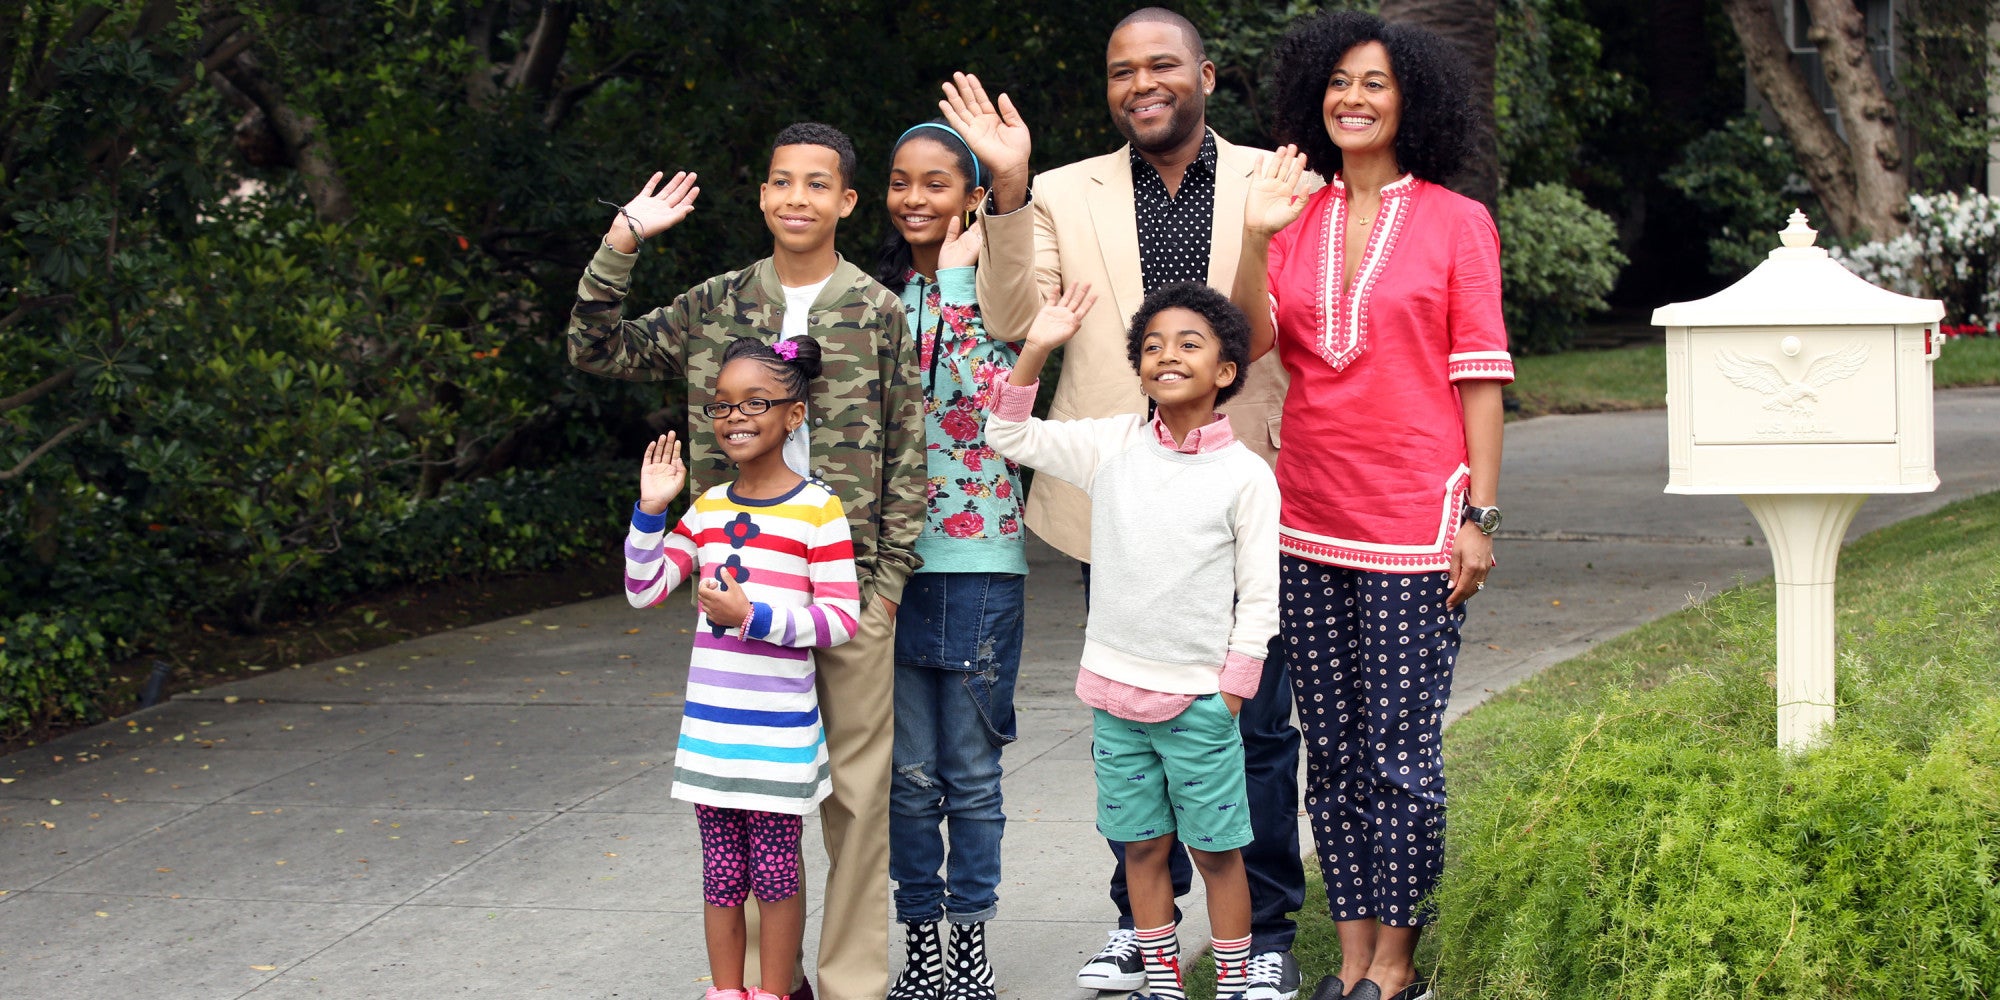 Confronting Racism: My Black Is Beautiful Teams With 'Black-ish' For Episode About 'The Talk'
